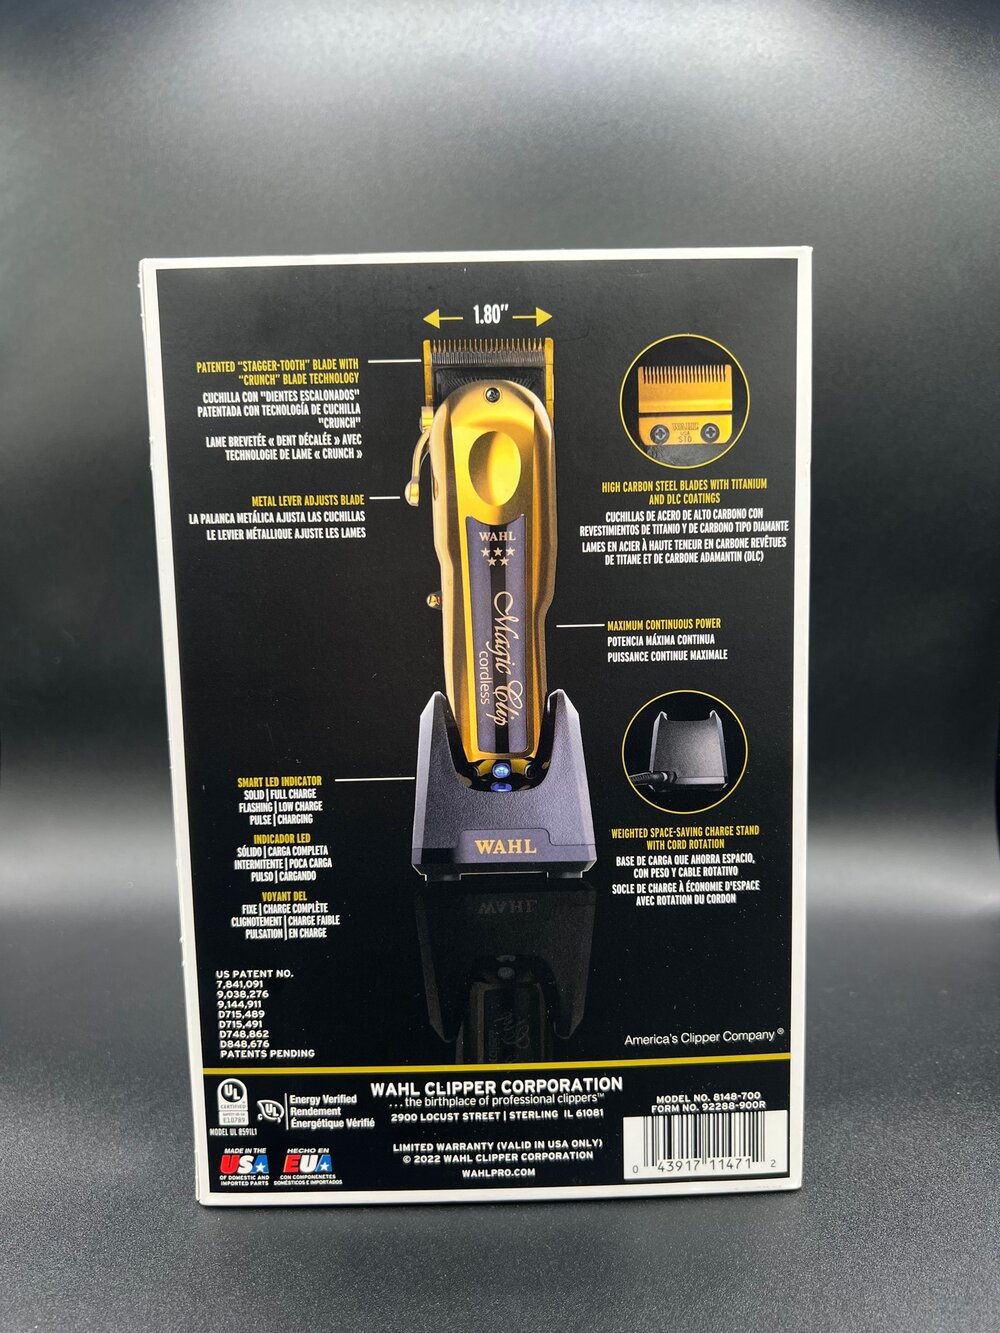 Oster Professional Products — Authority Barber & Beauty Supply Shop —  Authority Barber & Beauty Supply